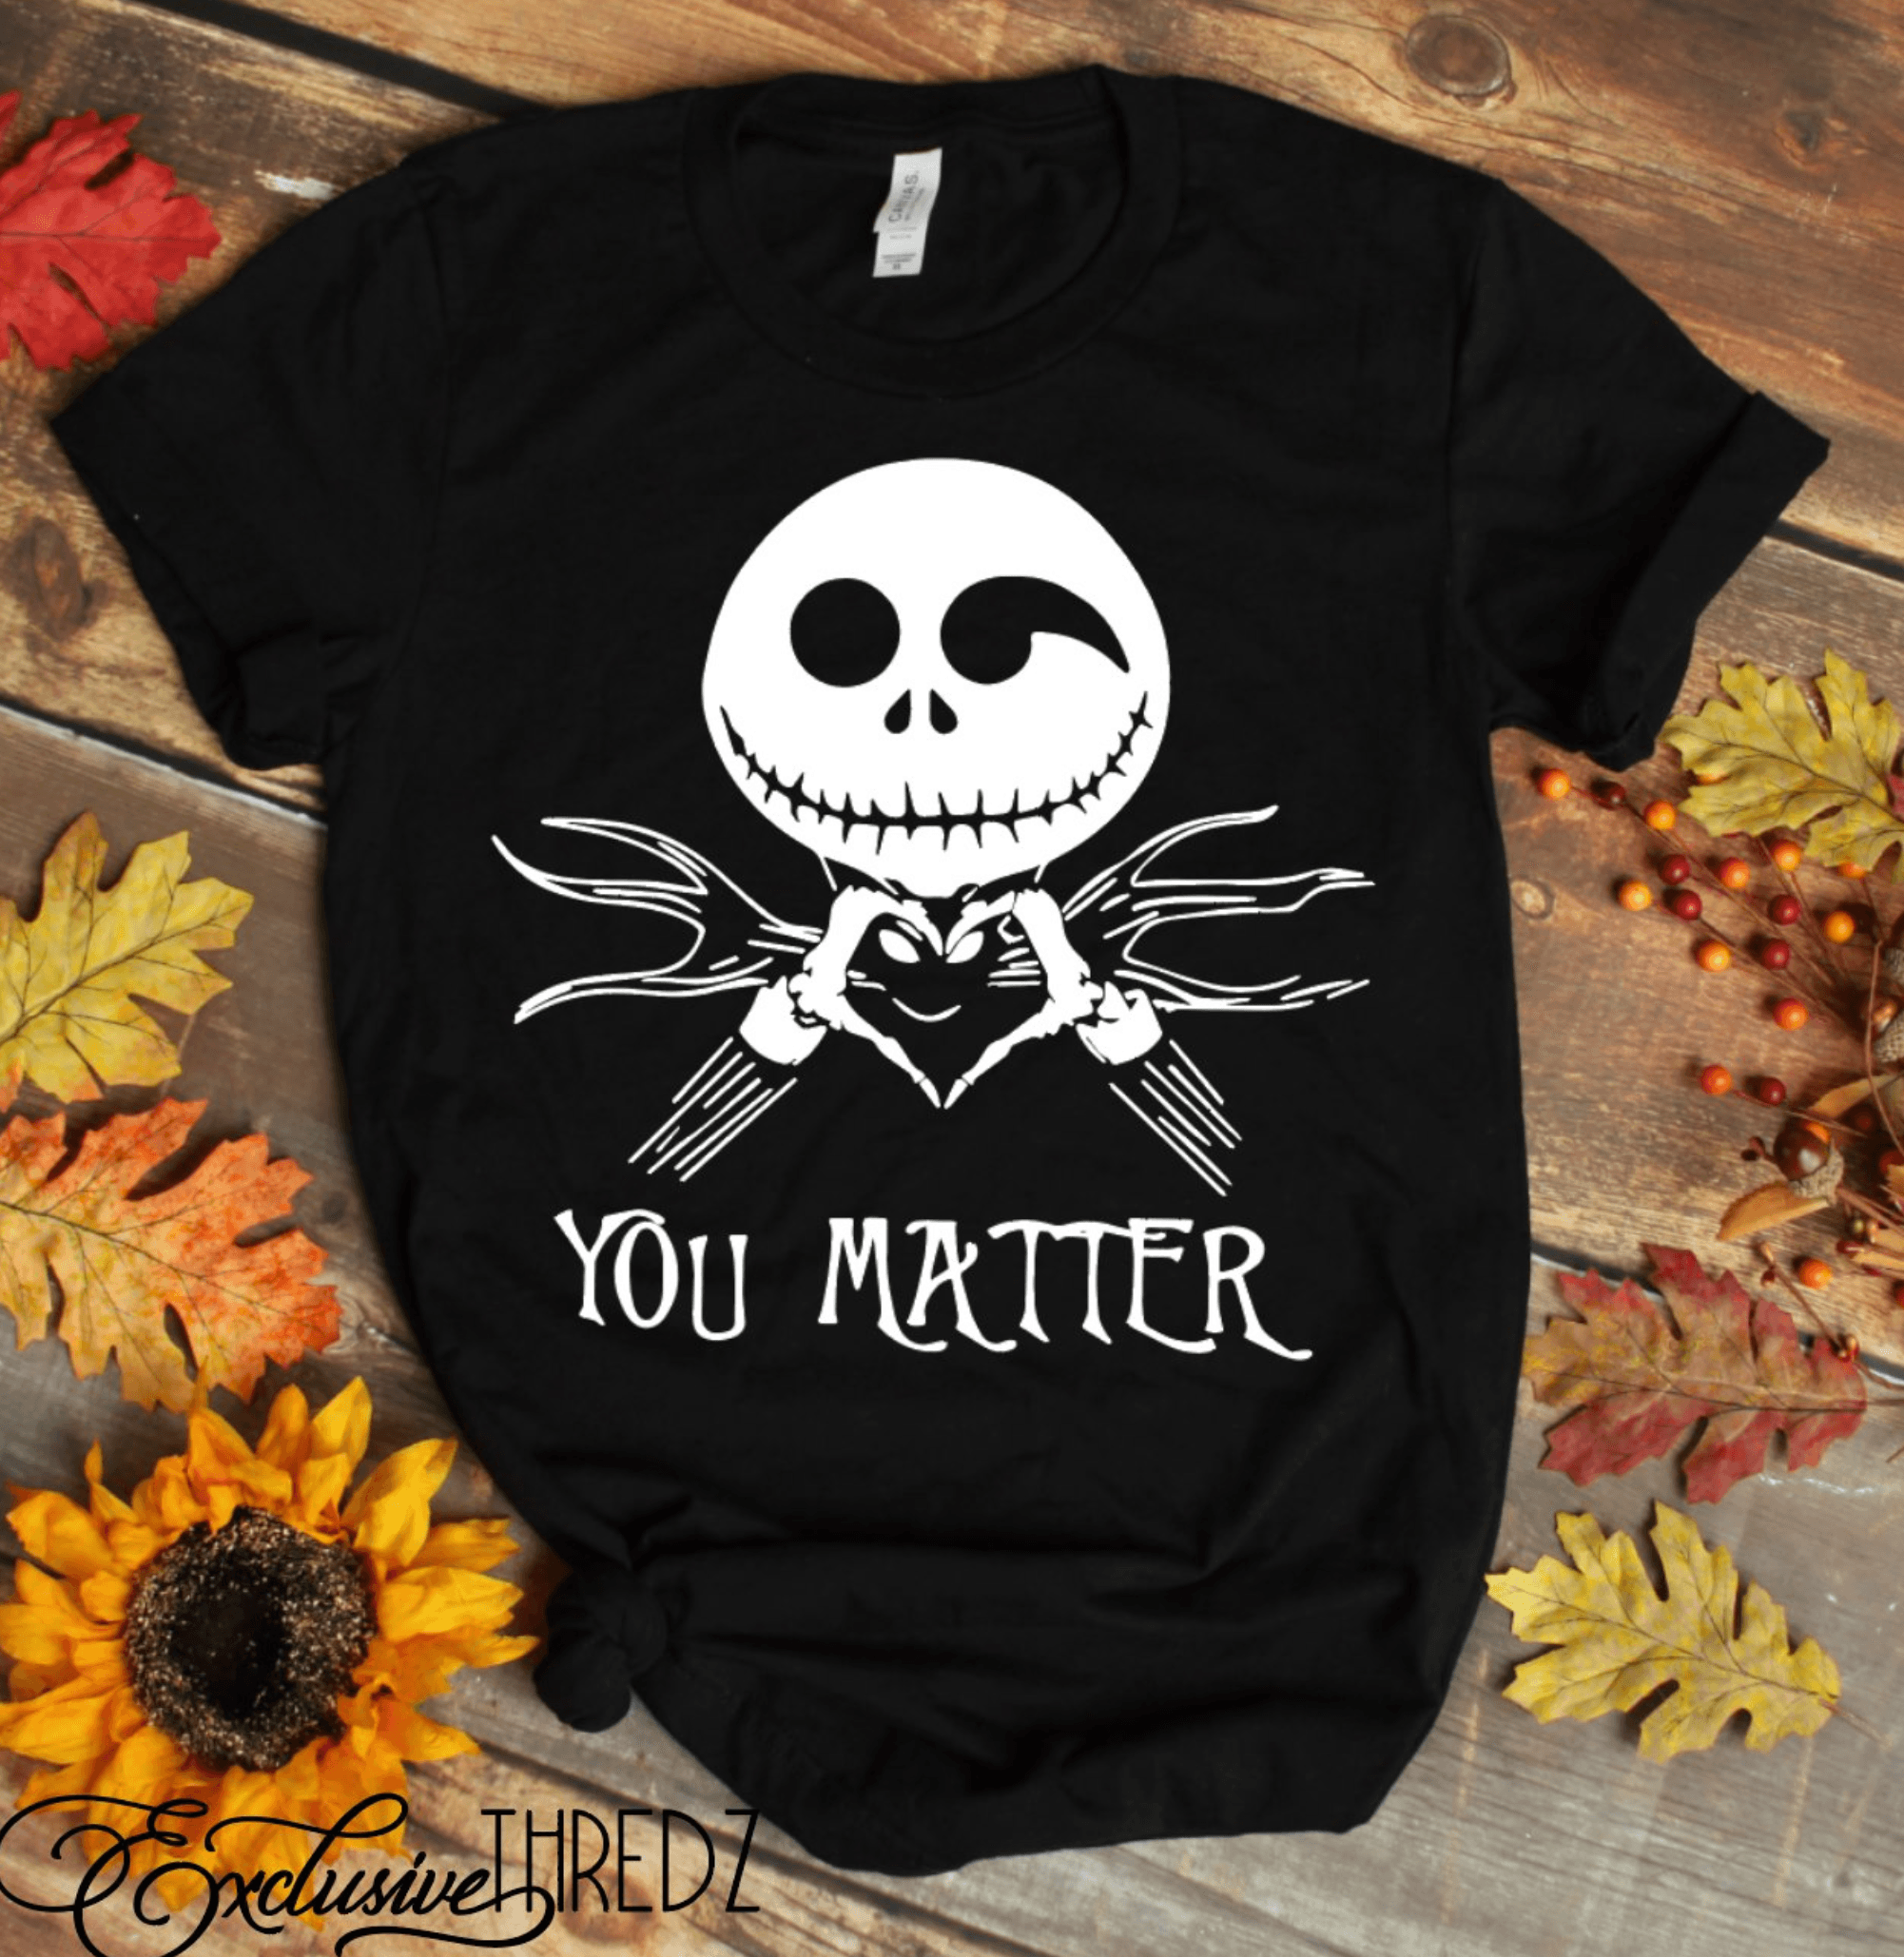 YOU MATTER - Signastyle Boutique